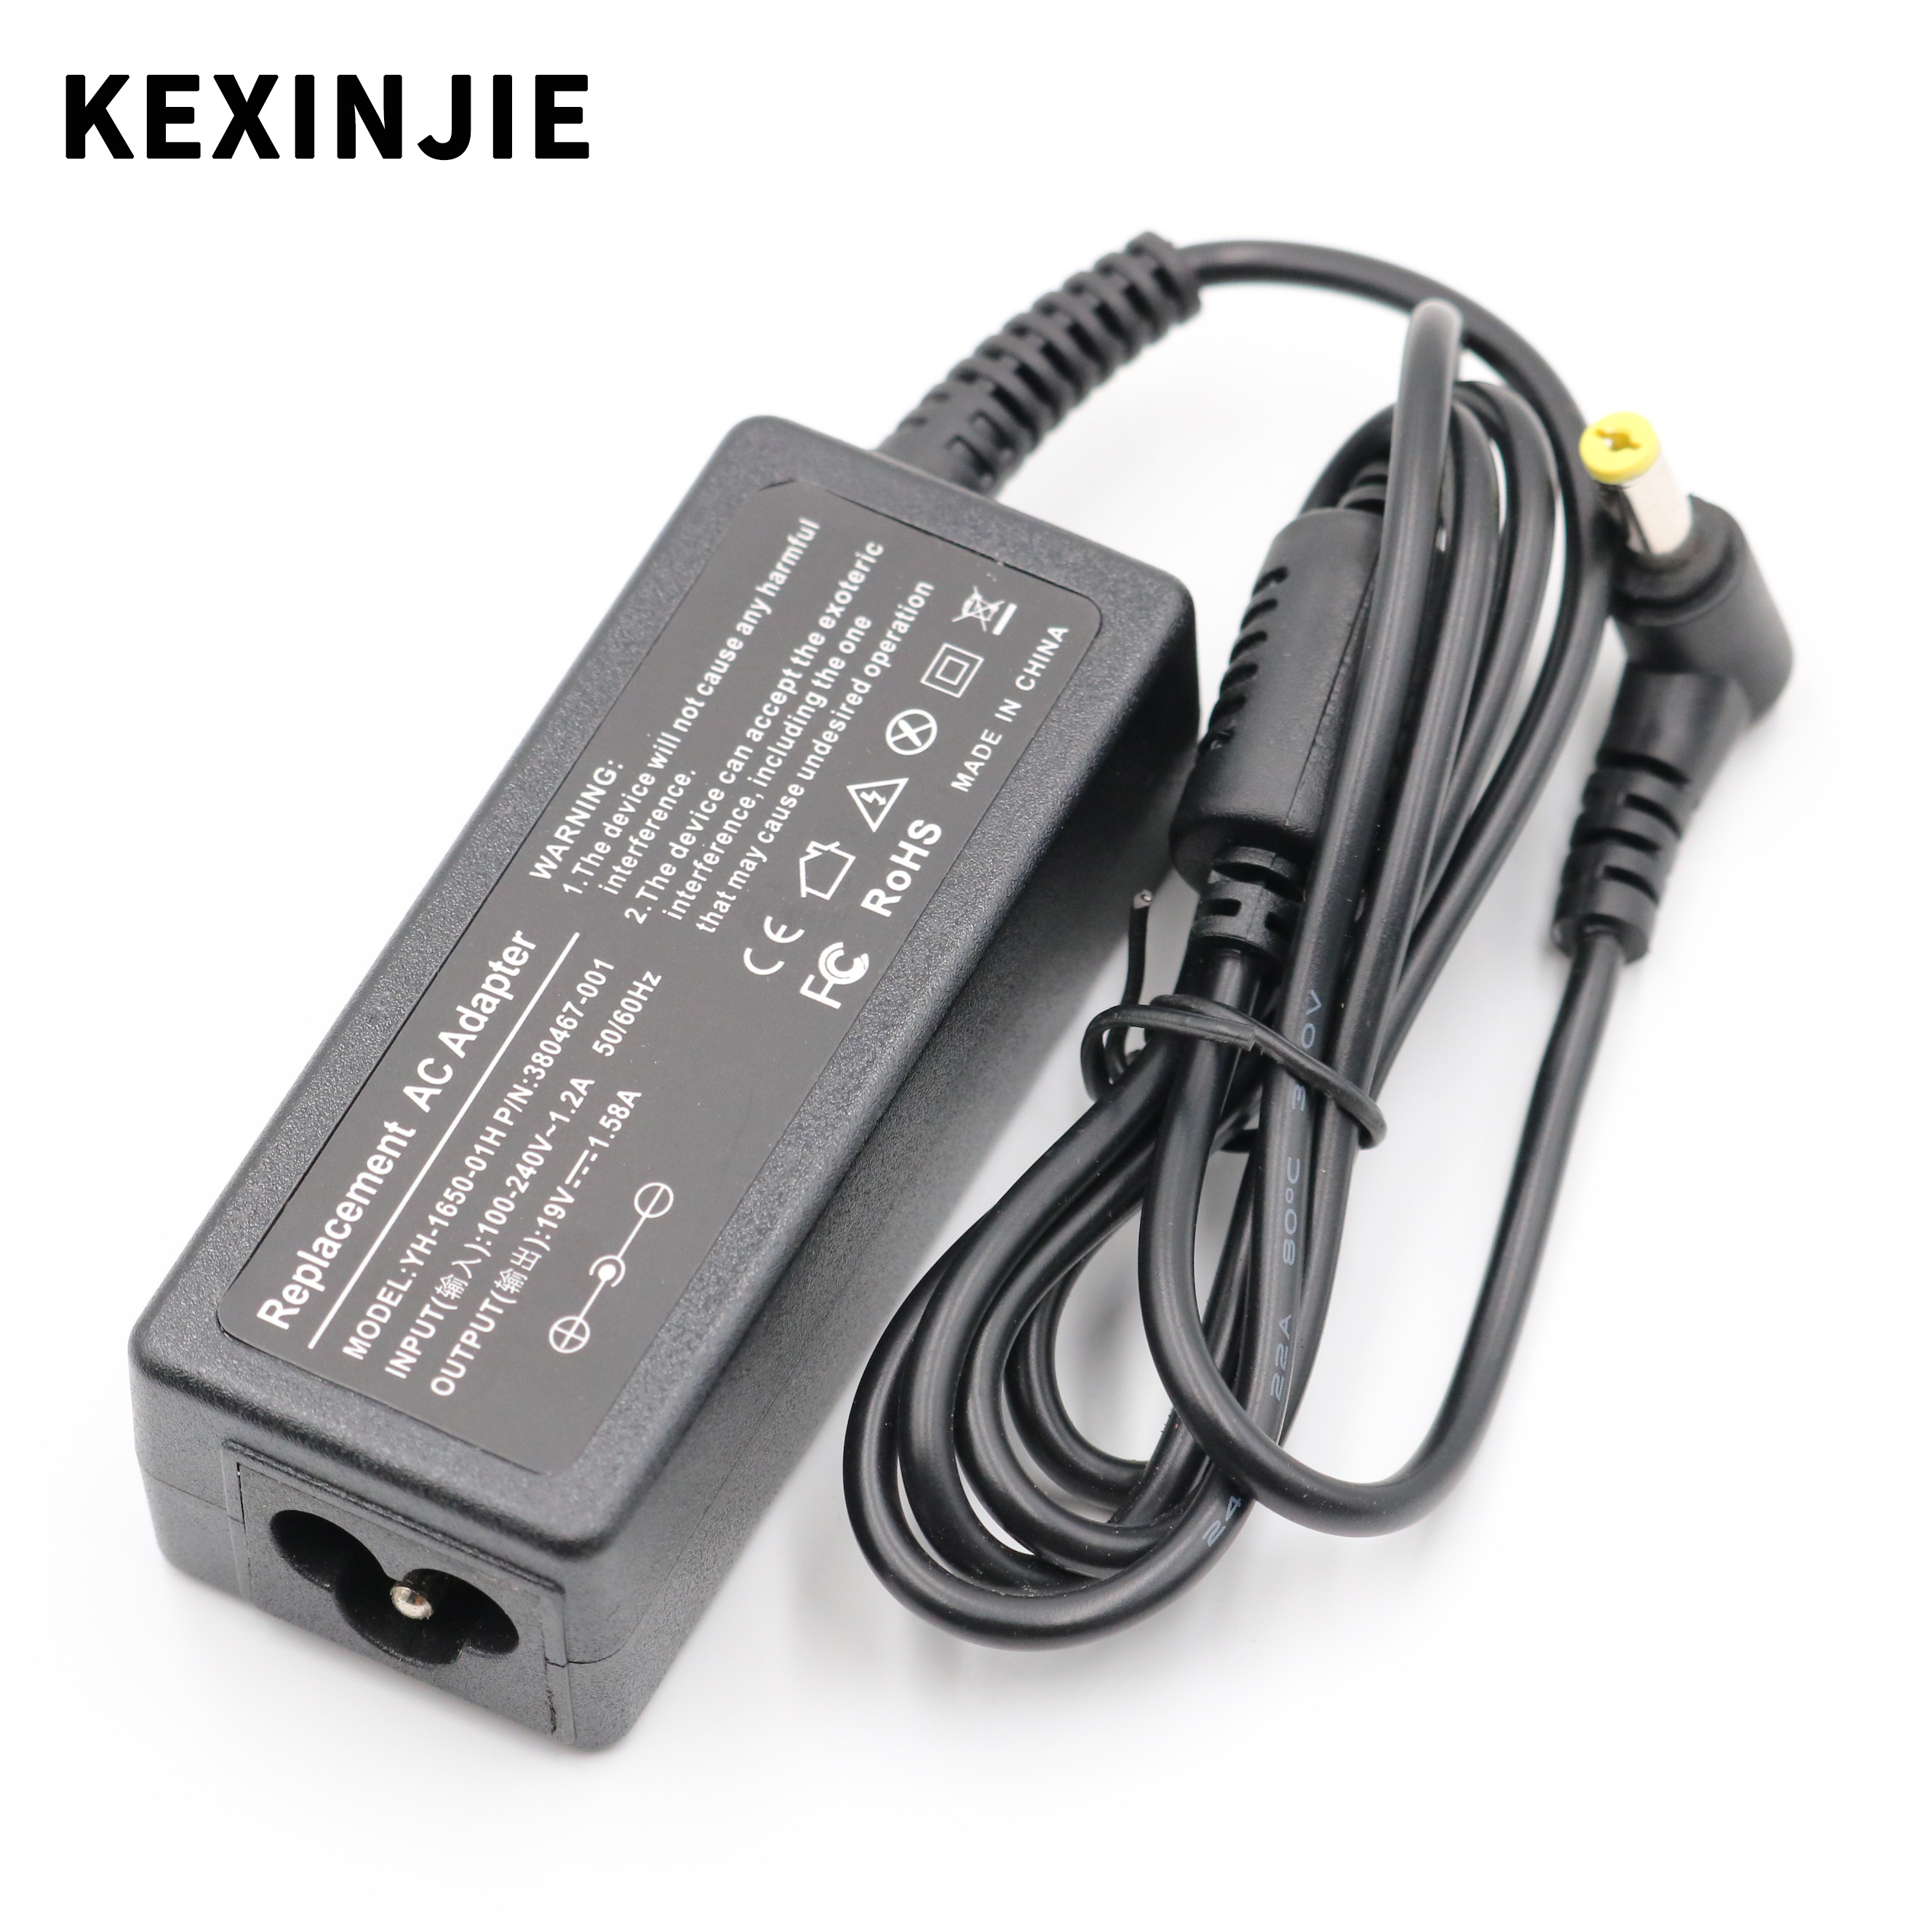 dell mini laptop charger